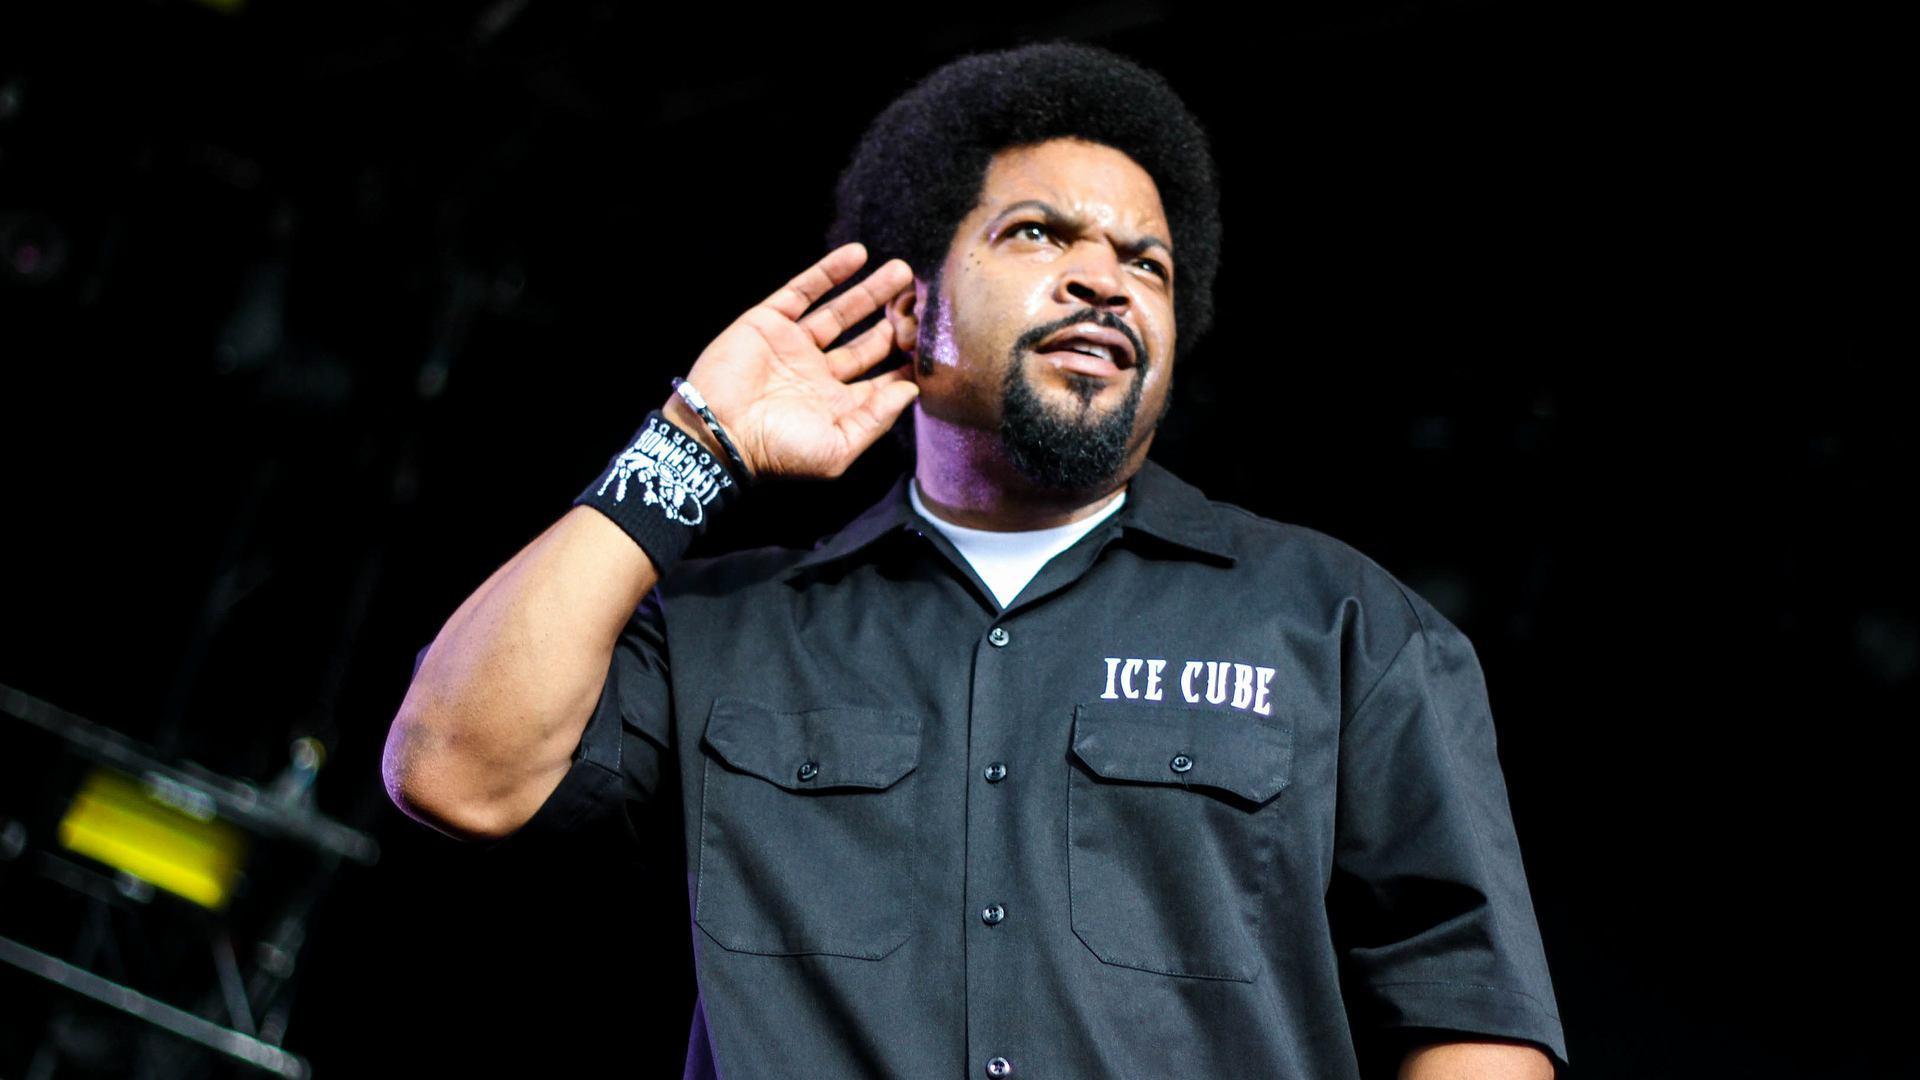 Wallpaper For > Ice Cube Rapper Background